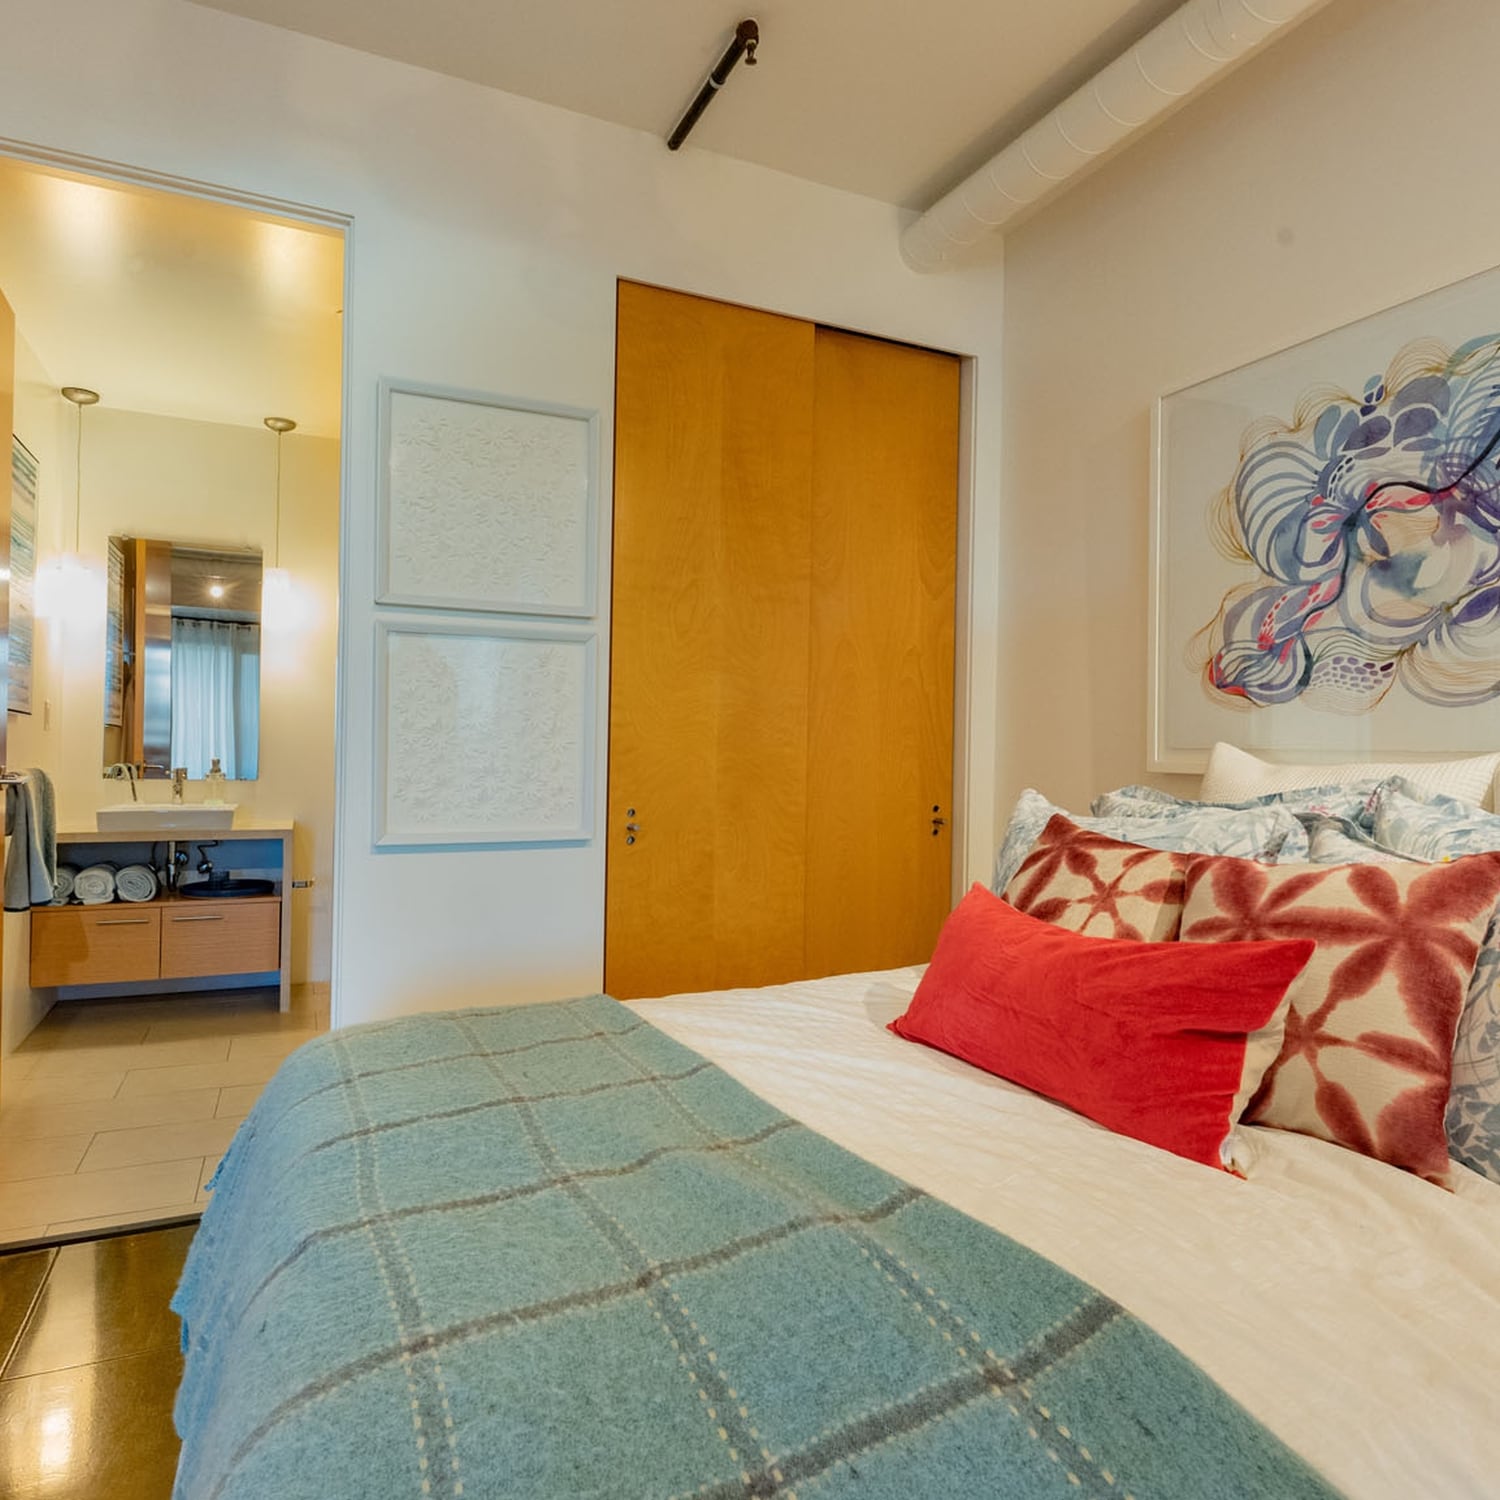 Apartments in Dogpatch-Spacious Master Bedroom With Dark Hardwood Floors, Master Bathroom, and Sliding Closet Doors